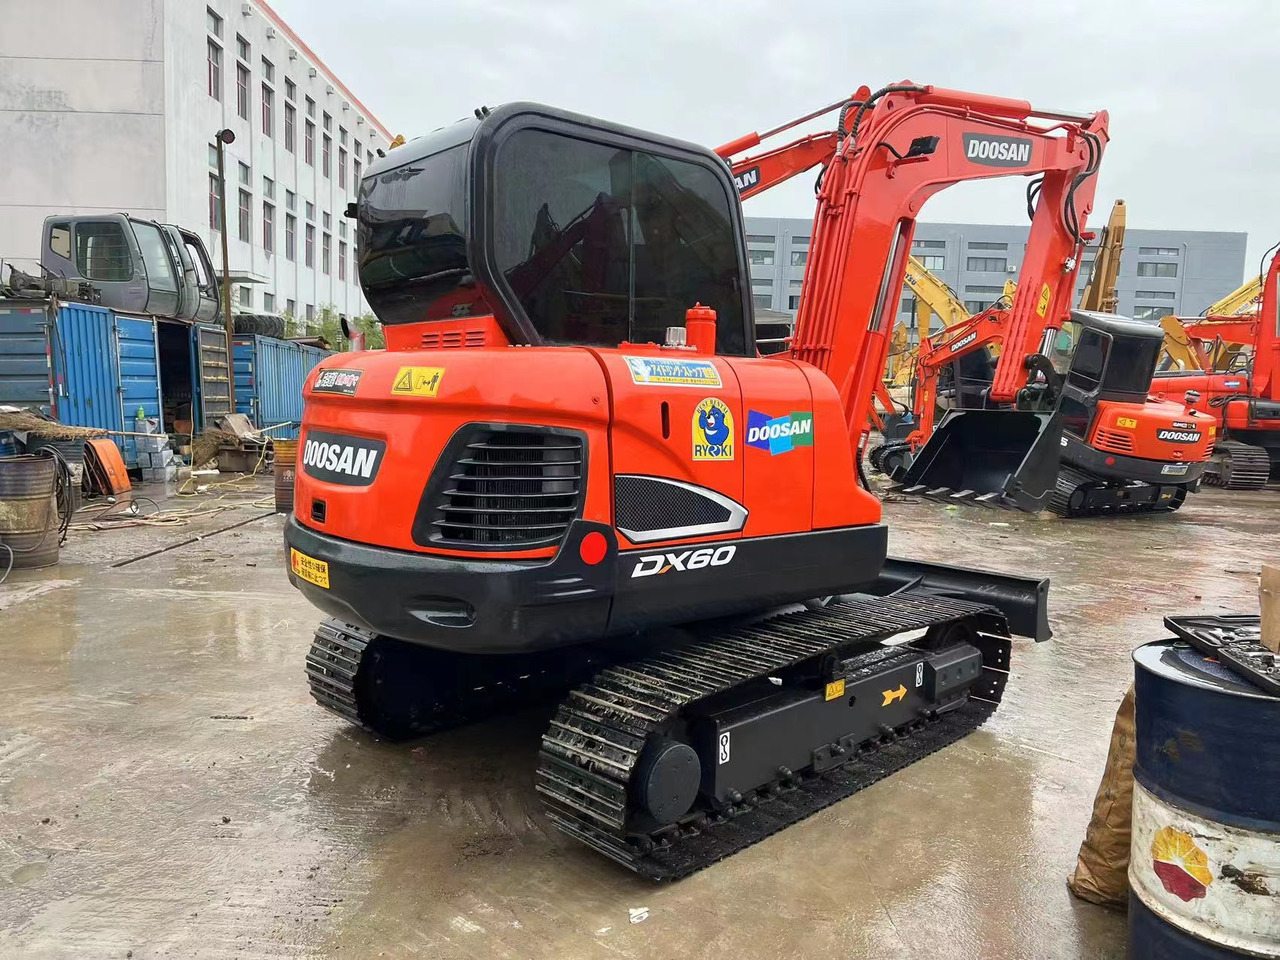 Pelle sur chenille High quality DOOSAN used excavator DX60 strong power hot selling !!!: photos 2